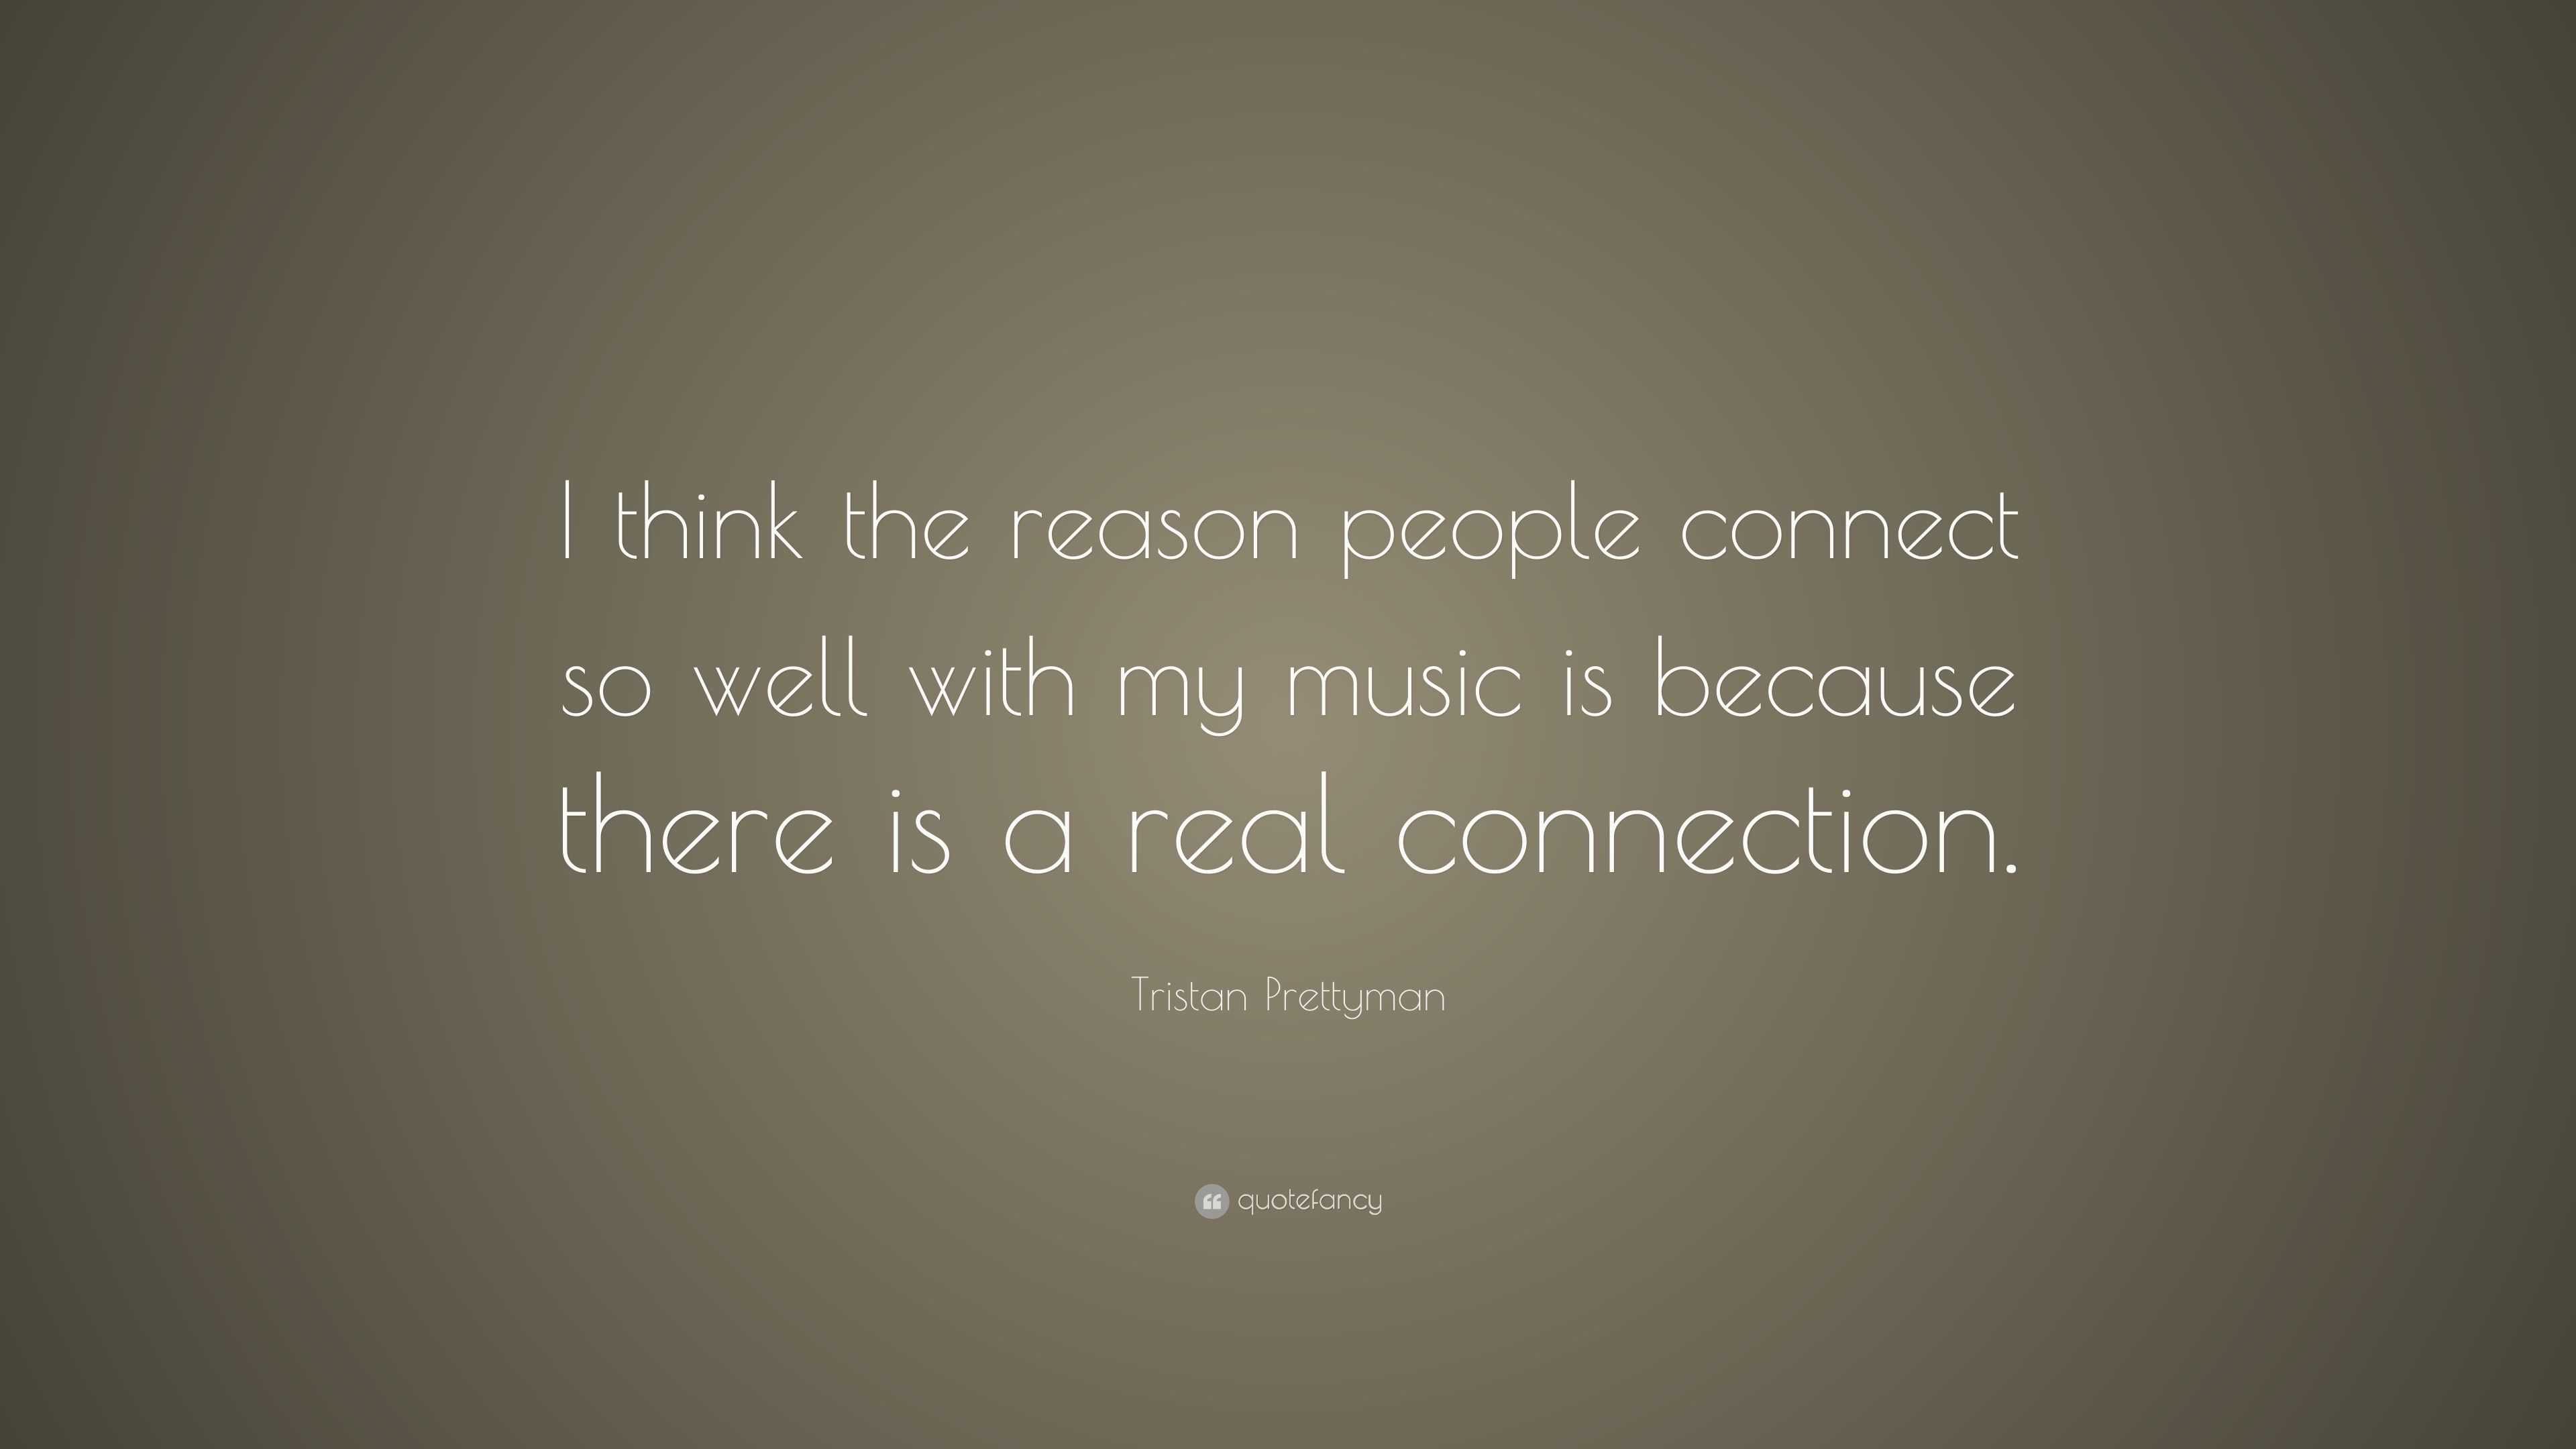 https://quotefancy.com/media/wallpaper/3840x2160/5883495-Tristan-Prettyman-Quote-I-think-the-reason-people-connect-so-well.jpg